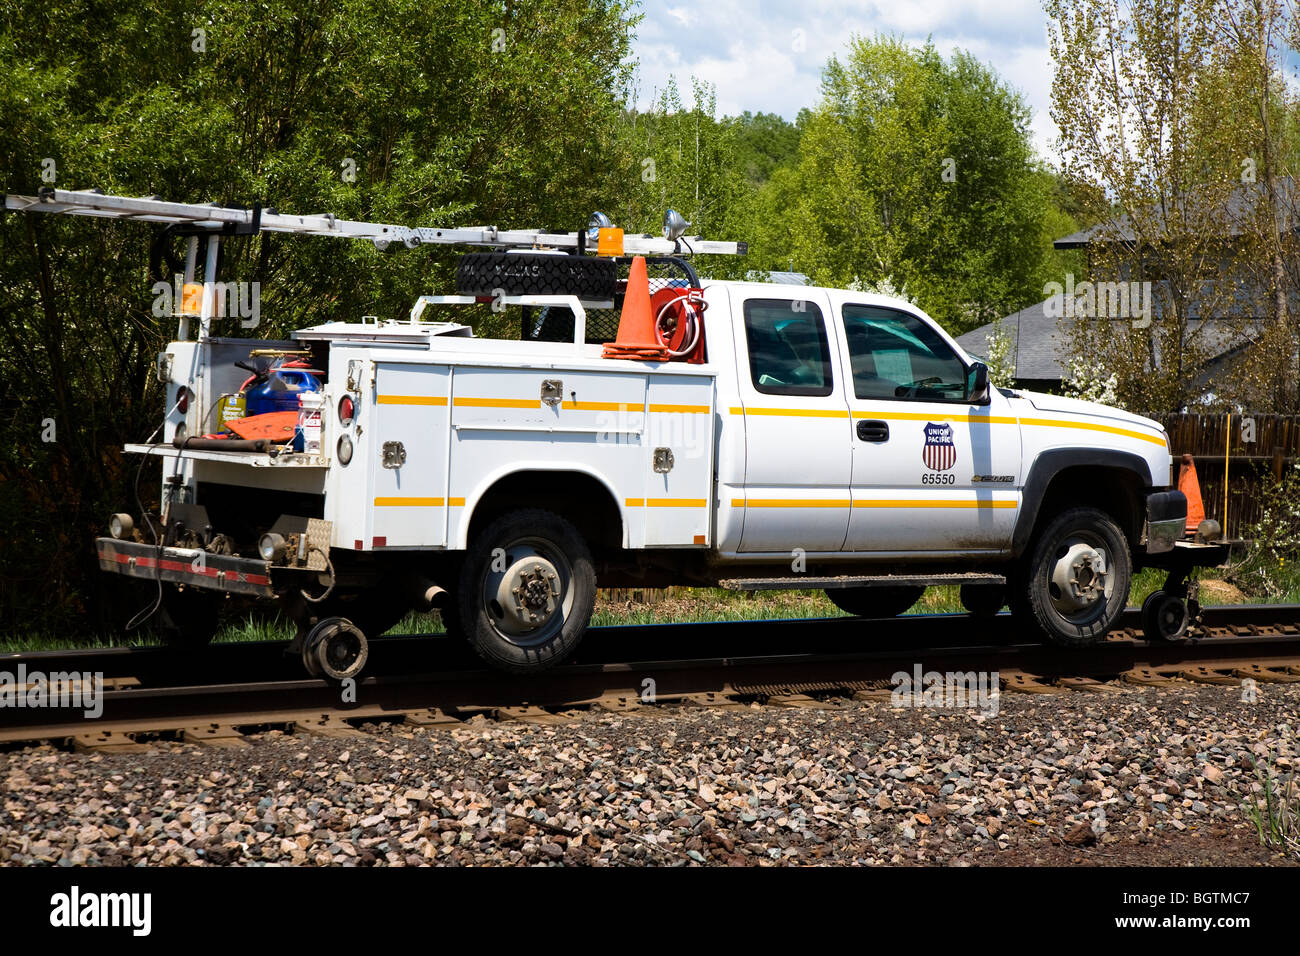 Pickup truck fitted with Hi-Rail attachment allowing it to run on the railroad tracks. Steamboat Springs, Colorado, USA Stock Photo